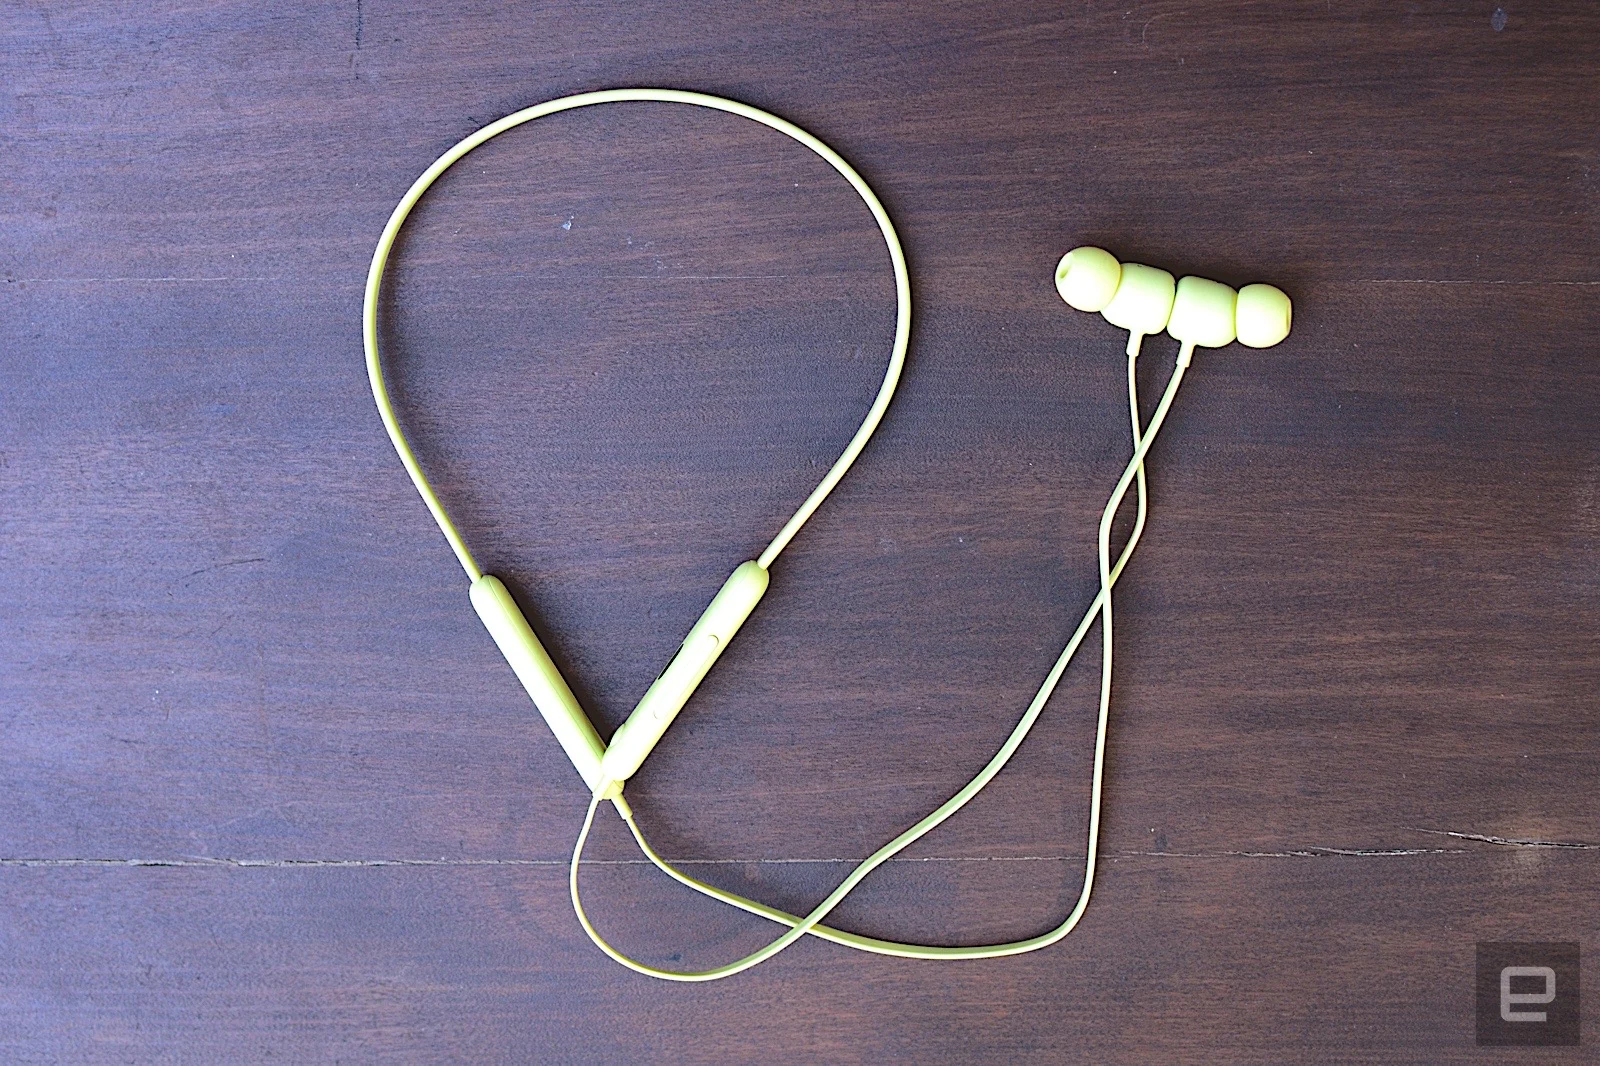 Beats’ most affordable wireless earbuds give you basic on-board controls with AirPod-level quick pairing. The Flex has longer battery life than the BeatsX as well, but the overall sound quality is not great. These will certainly get the job done, but if audio is your primary concern, you’ll likely want to look elsewhere. 